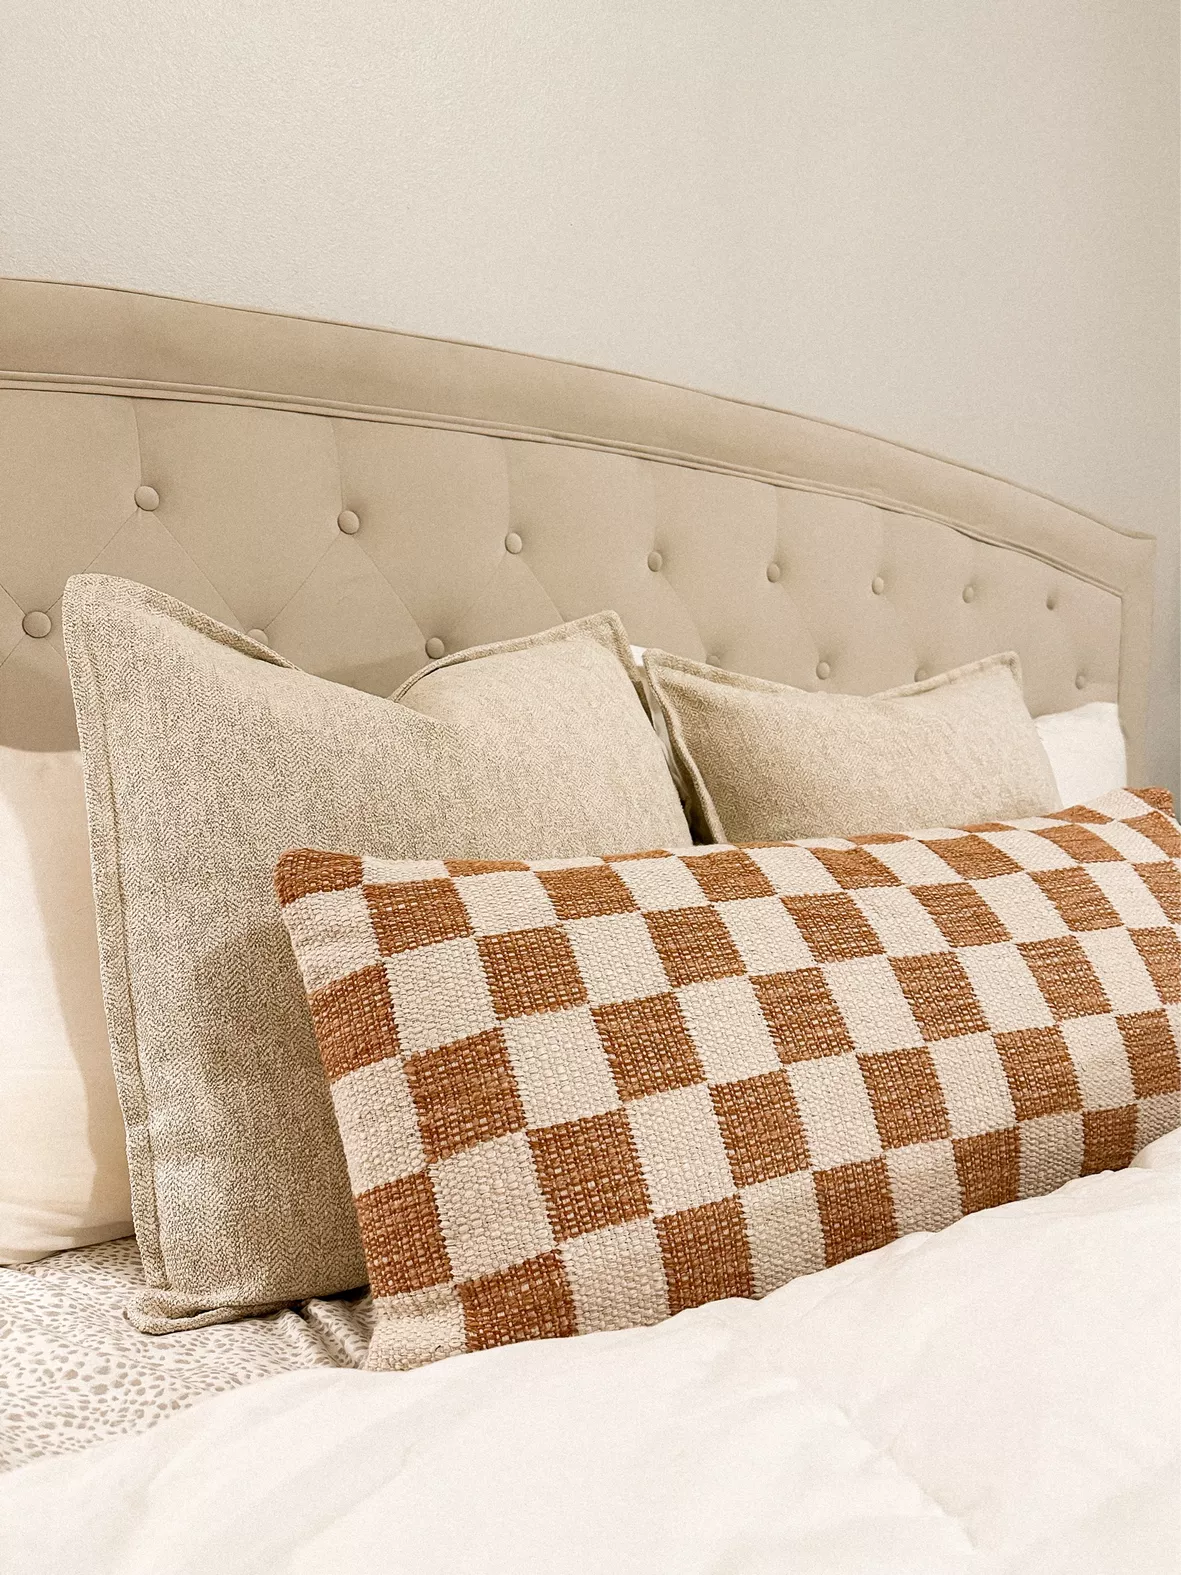 Extra Wide Ivory Checkered Lumbar Pillow by World Market